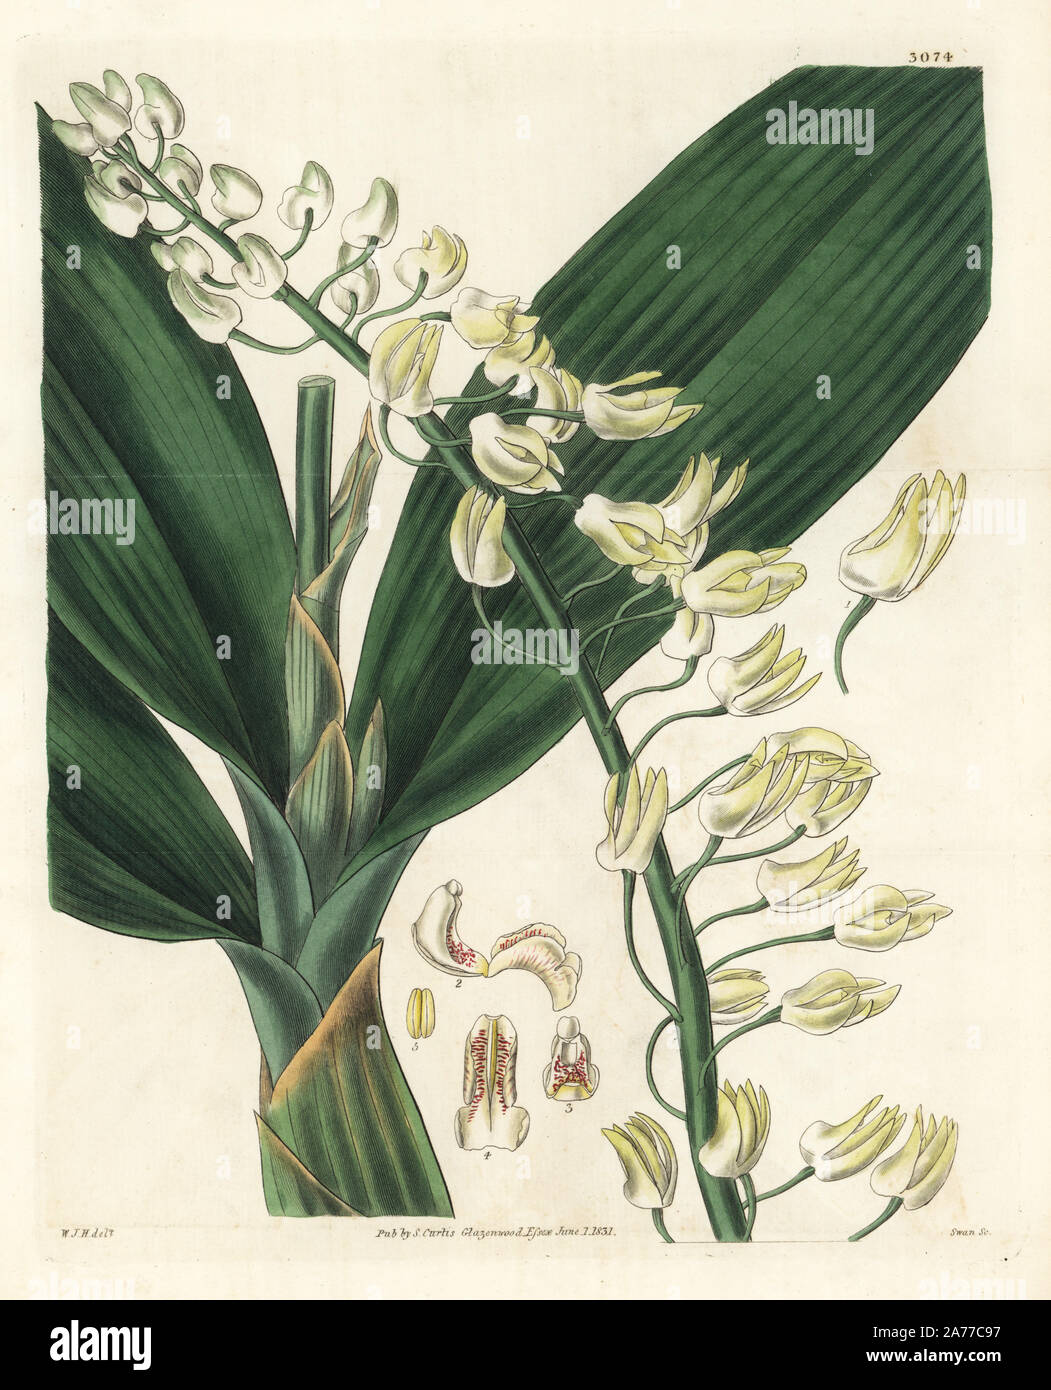 Great dendrobium orchid, Dendrobium speciosum. Handcoloured copperplate engraving by Swan after an illustration by William Jackson Hooker from Samuel Curtis's 'Botanical Magazine,' London, 1831. Stock Photo